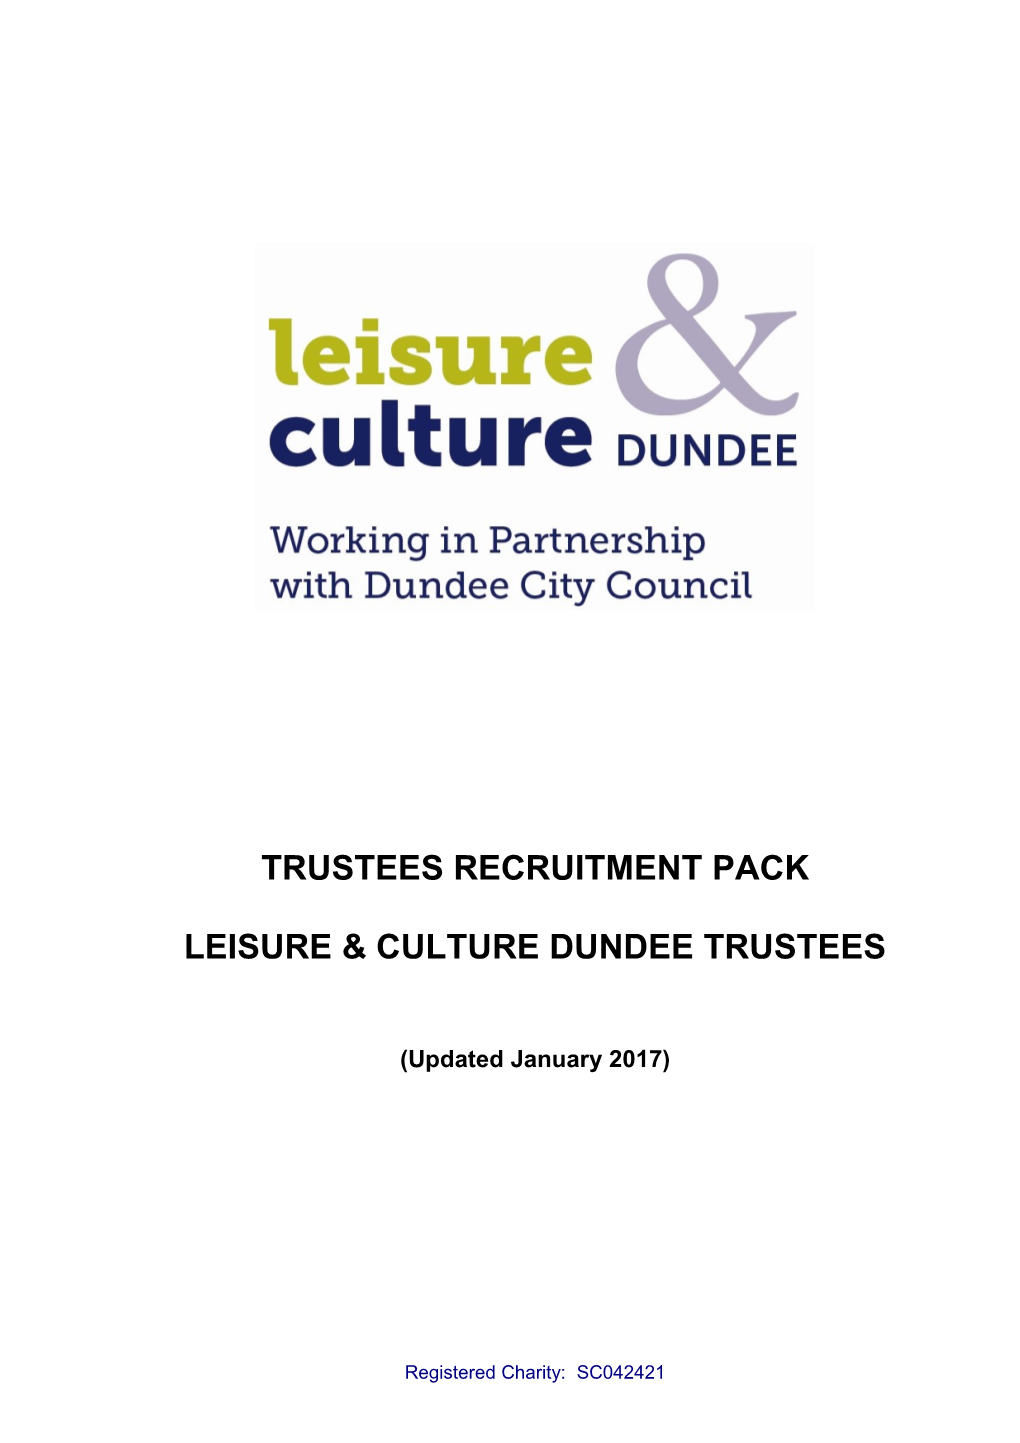 Leisure & Culture Dundee Trustees